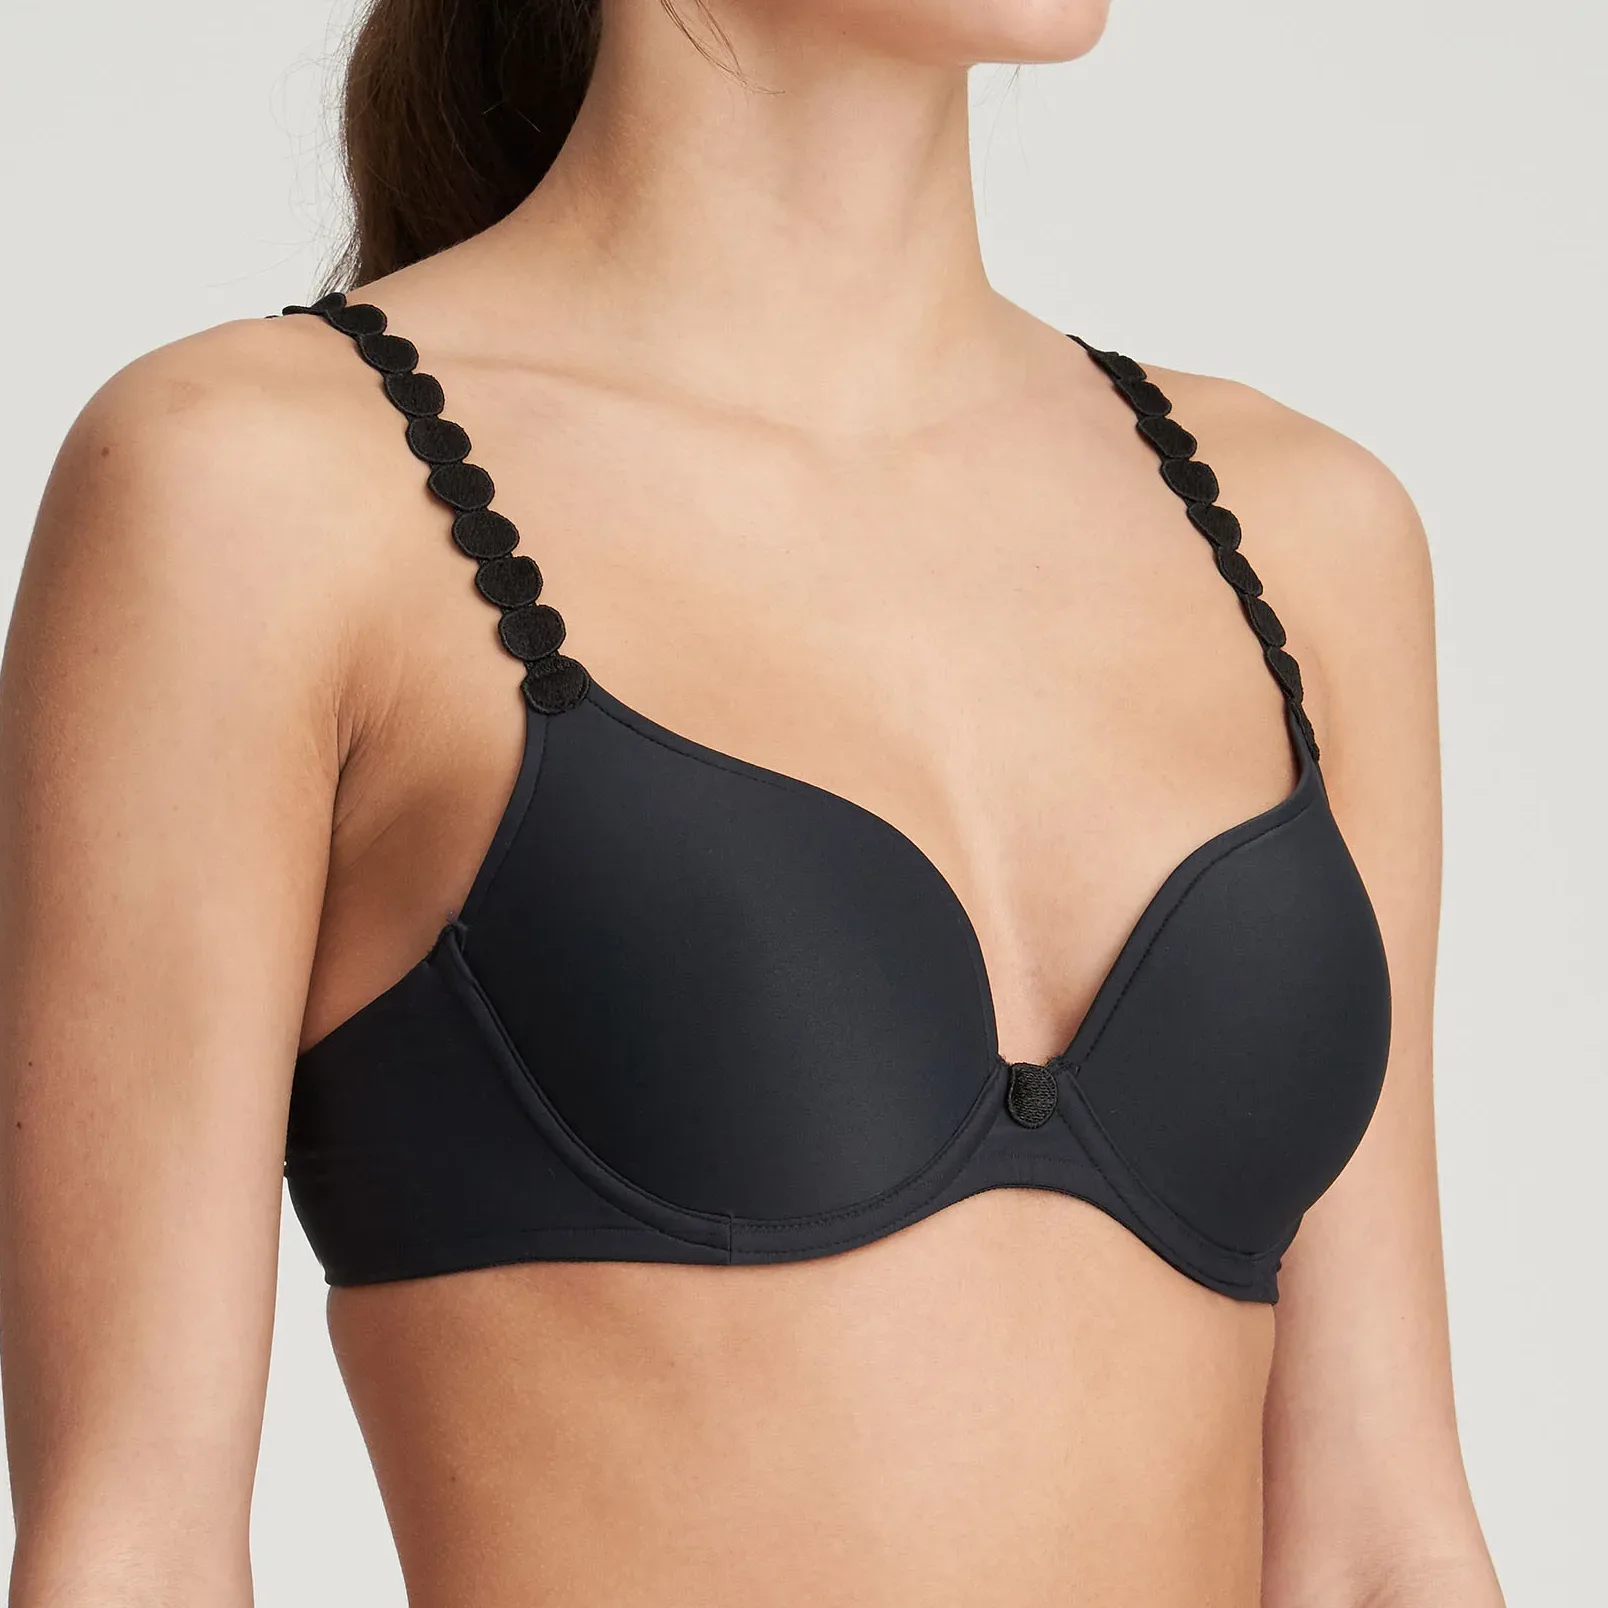 Denise's Boutique - No more mis-laying your favourite comfy and special Bras  Sets; with this breathable Bra Hanger. Love it!!  Avon.uk.com/store/denises-boutique #Denisesboutique #presents #mothersday  #smartstorageideas #brahanger #hangingstorage